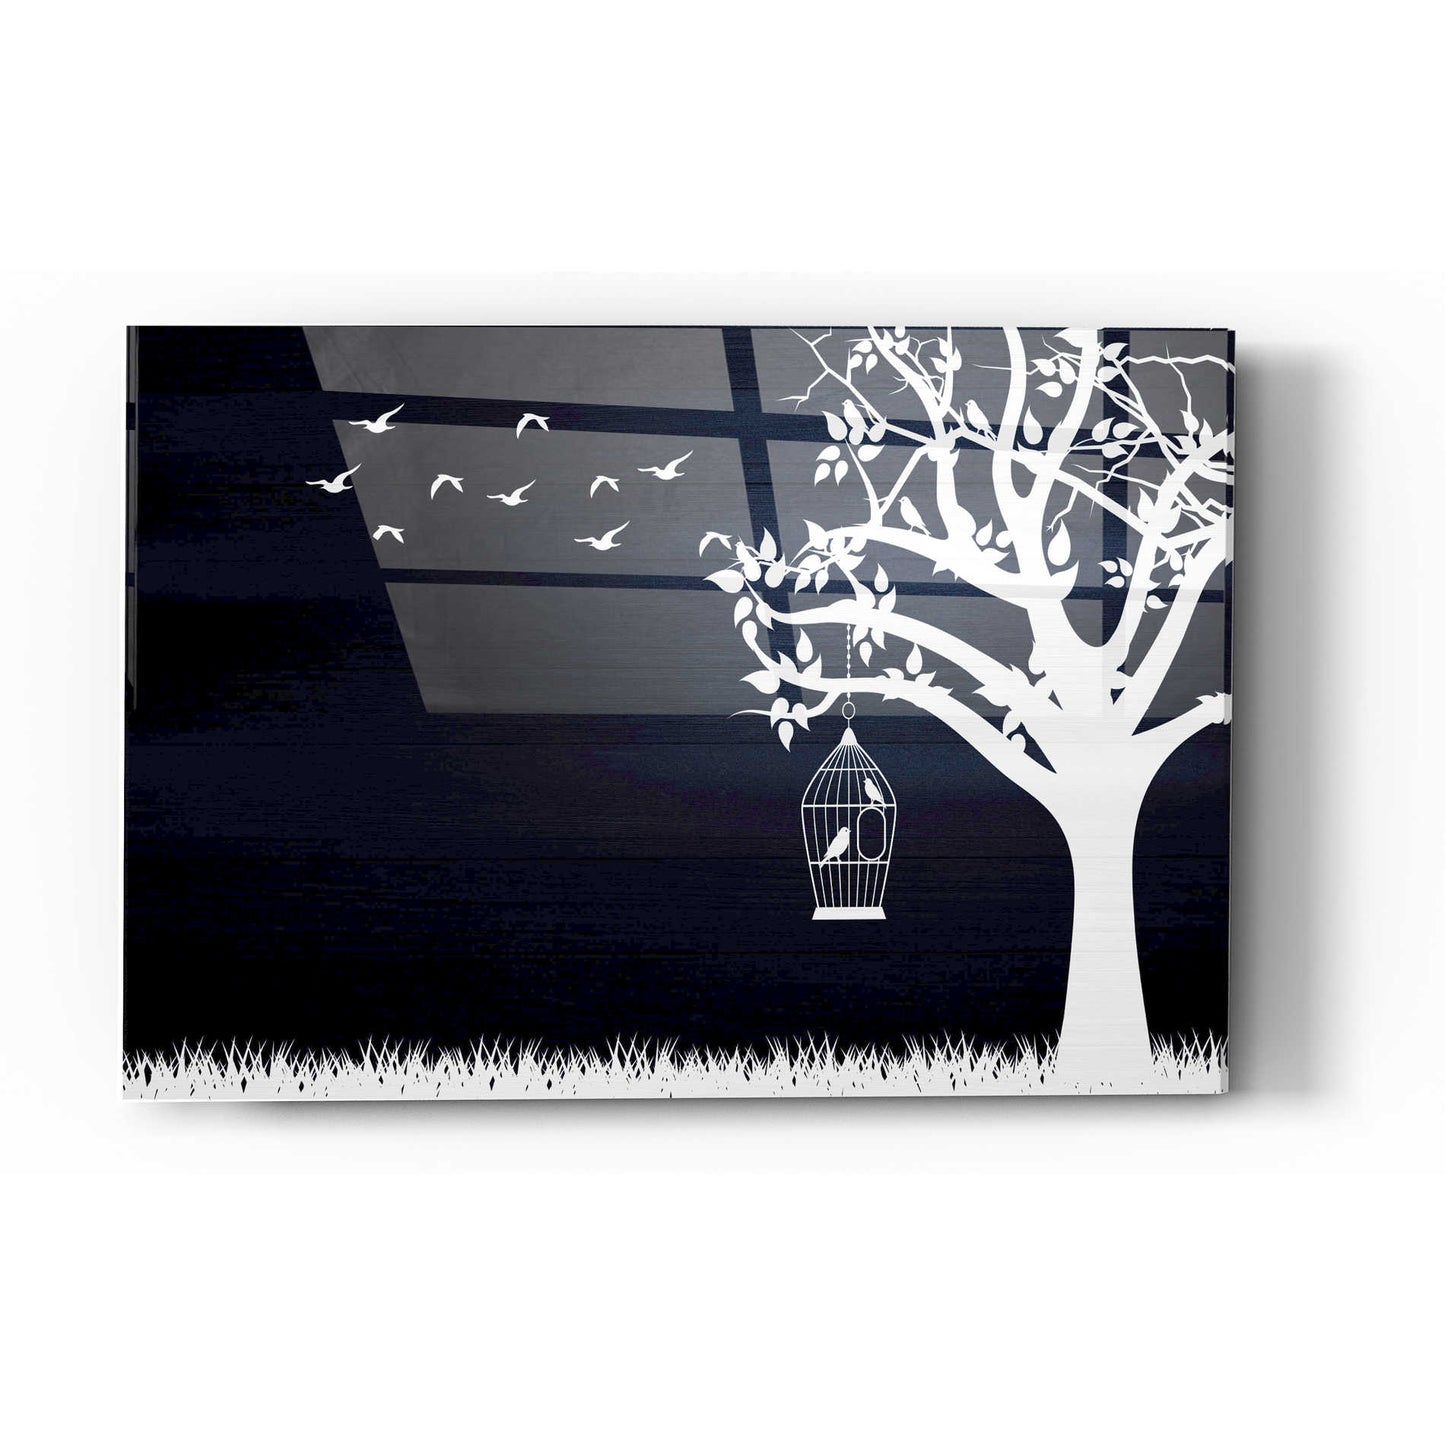 Epic Art "Wood Series: Birds and Tree, Inverted Silhouettes" Acrylic Glass Wall Art,24x36